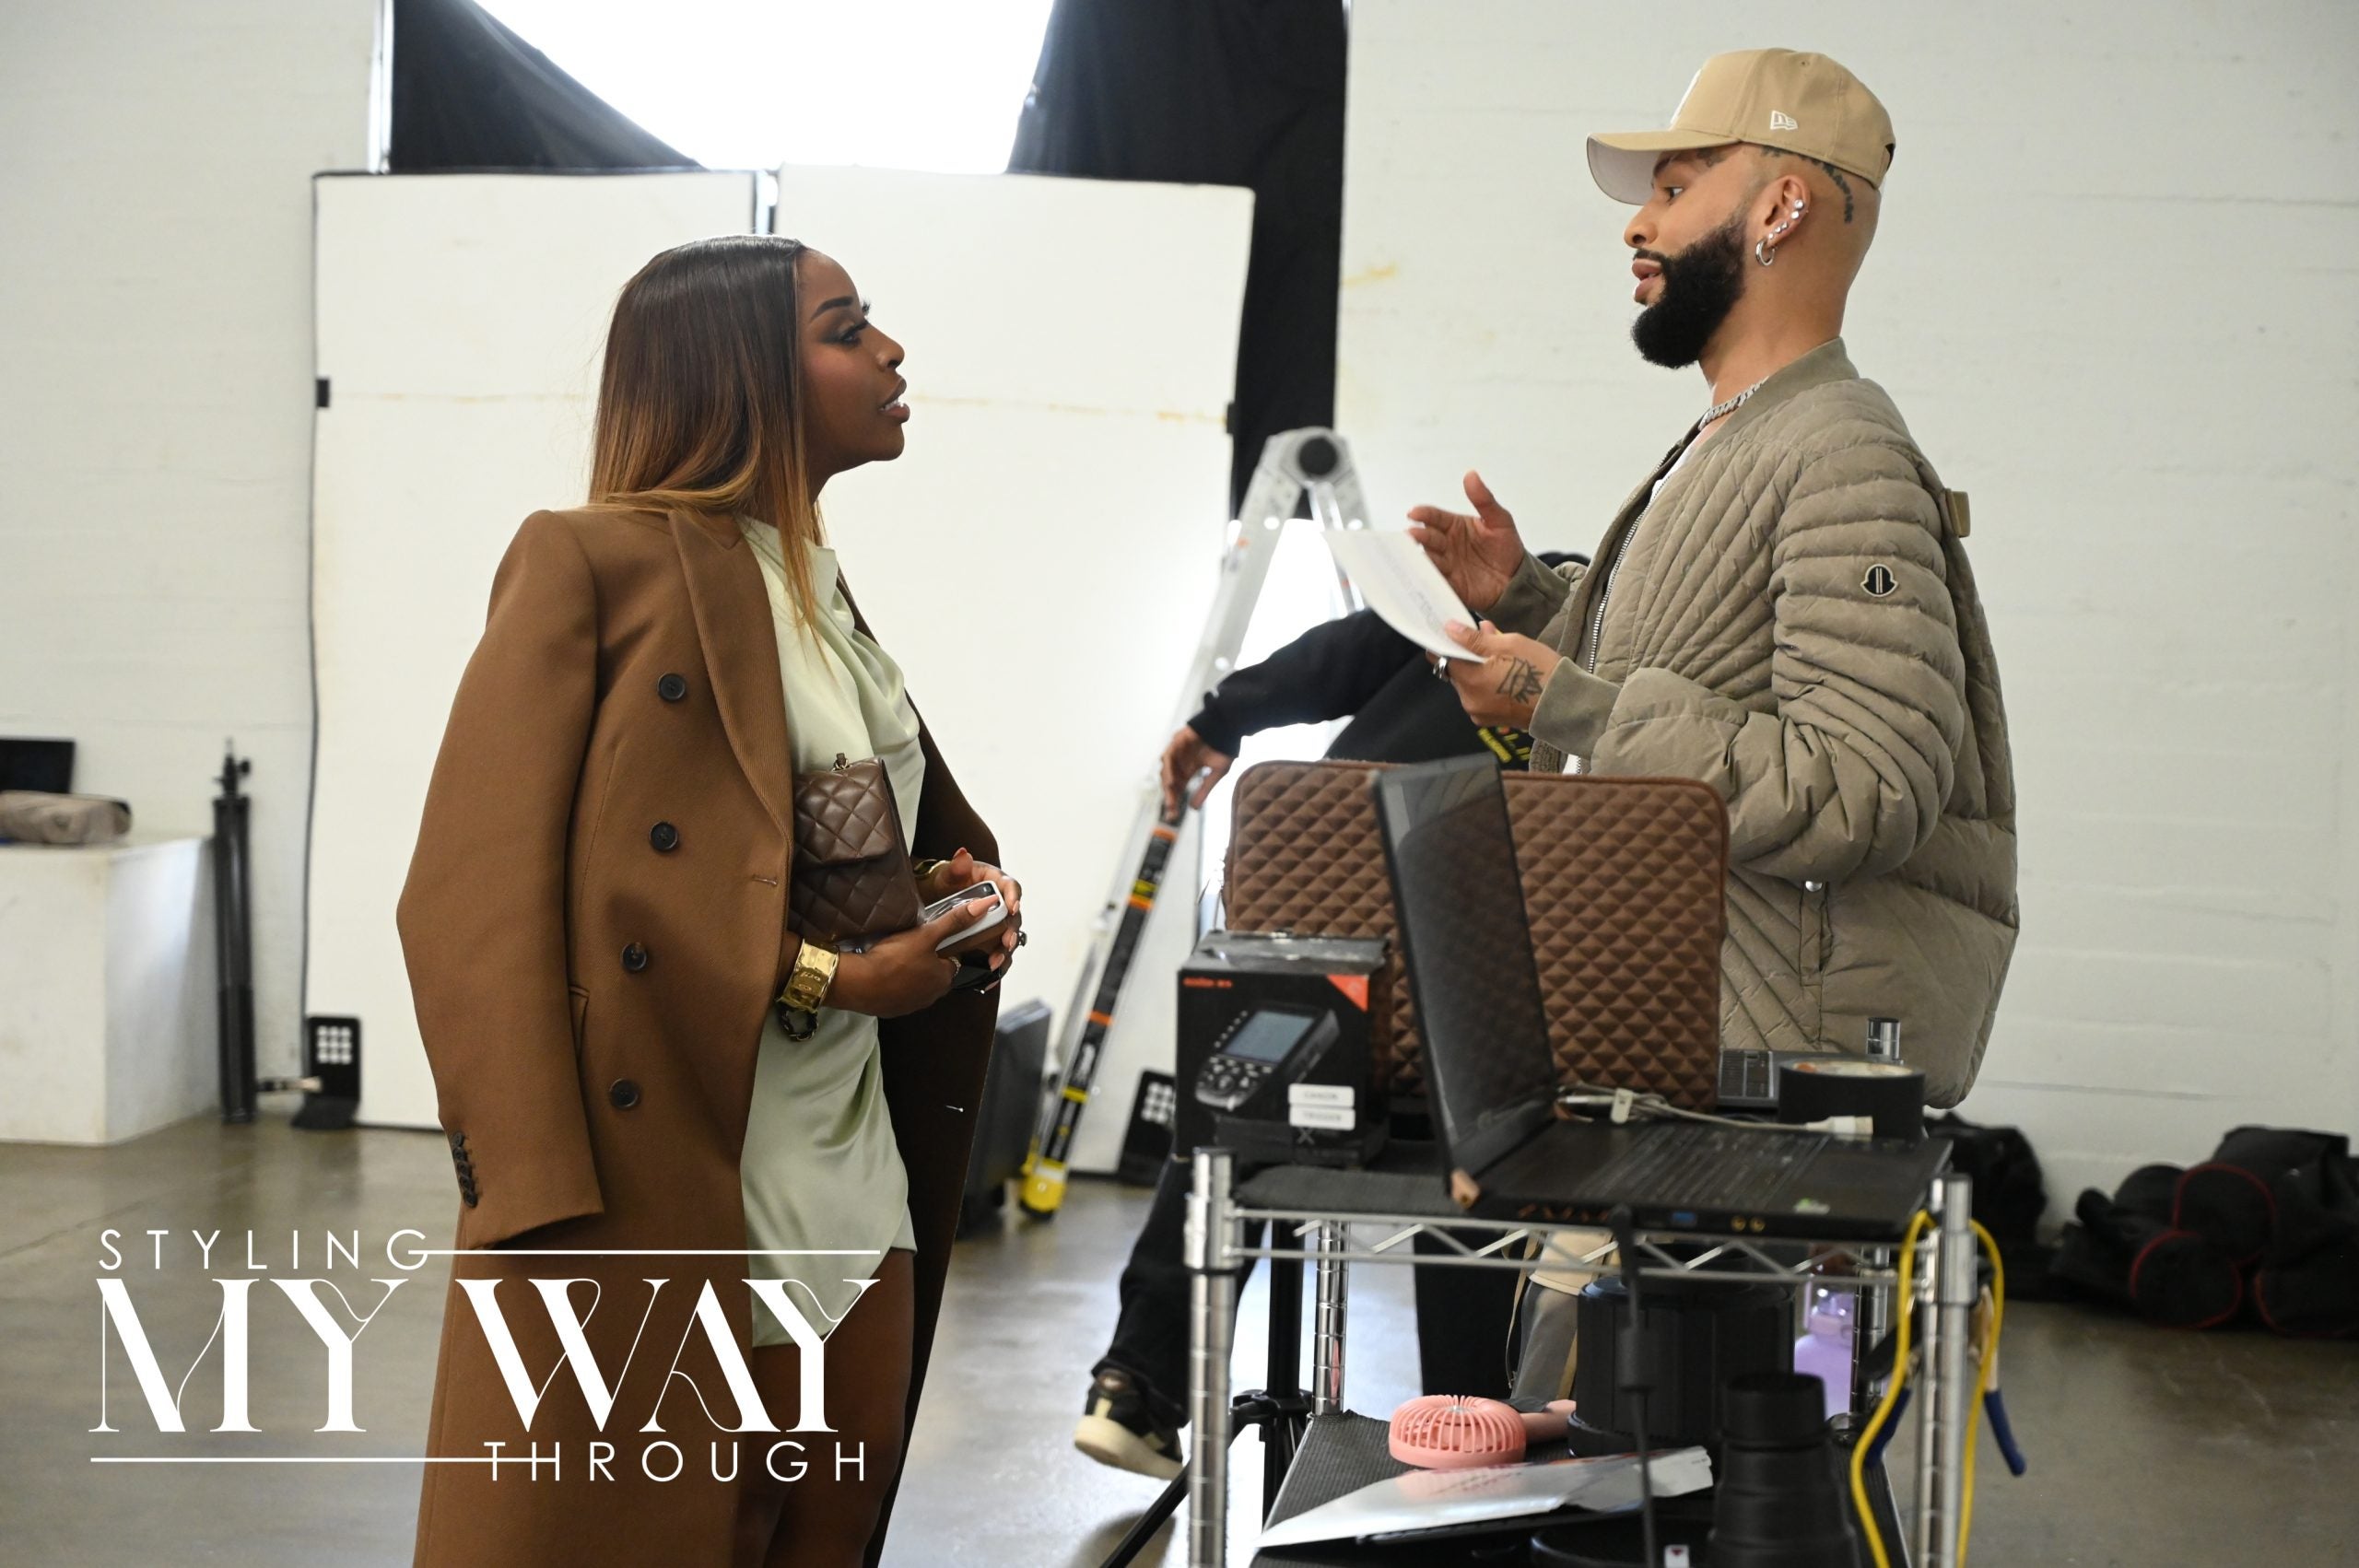 Celebrity Stylist Manny Jay On Launching His New Podcast ‘Styling My Way Through’